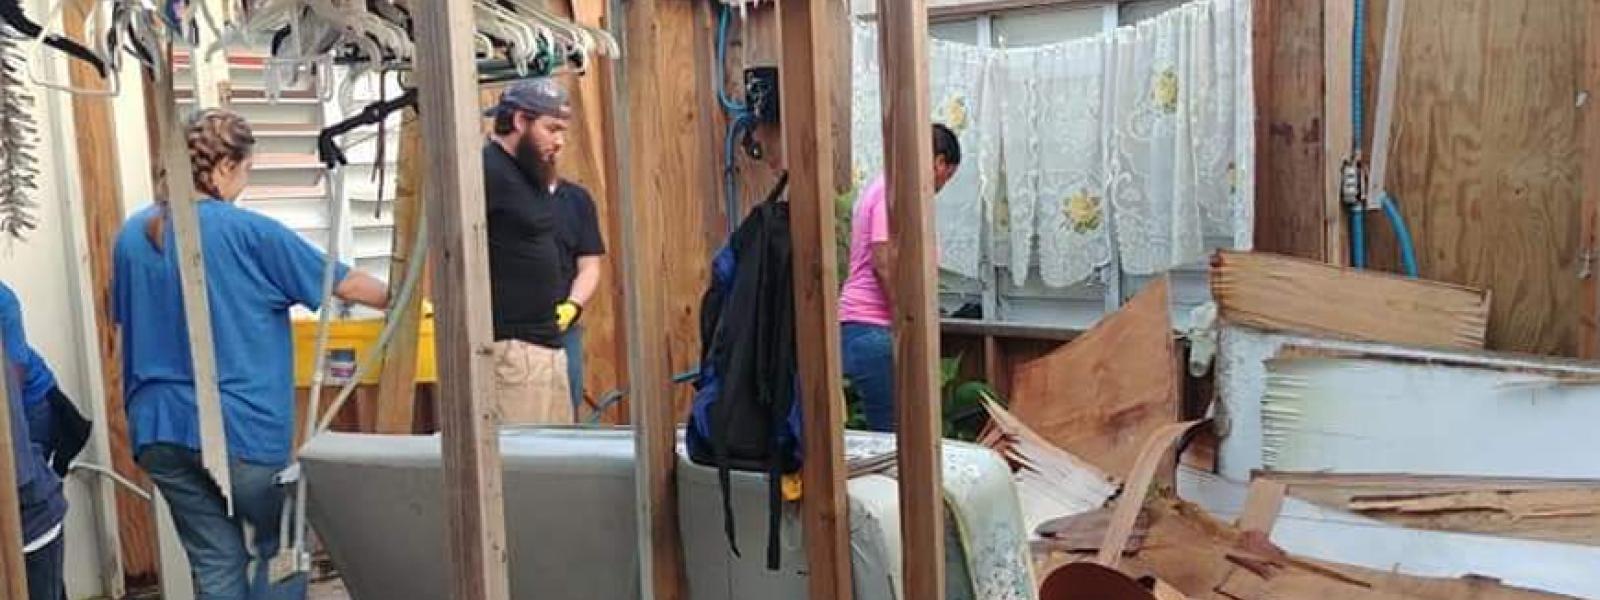 CIU students assist in disaster relief in Puerto Rico following Hurricane Maria.   